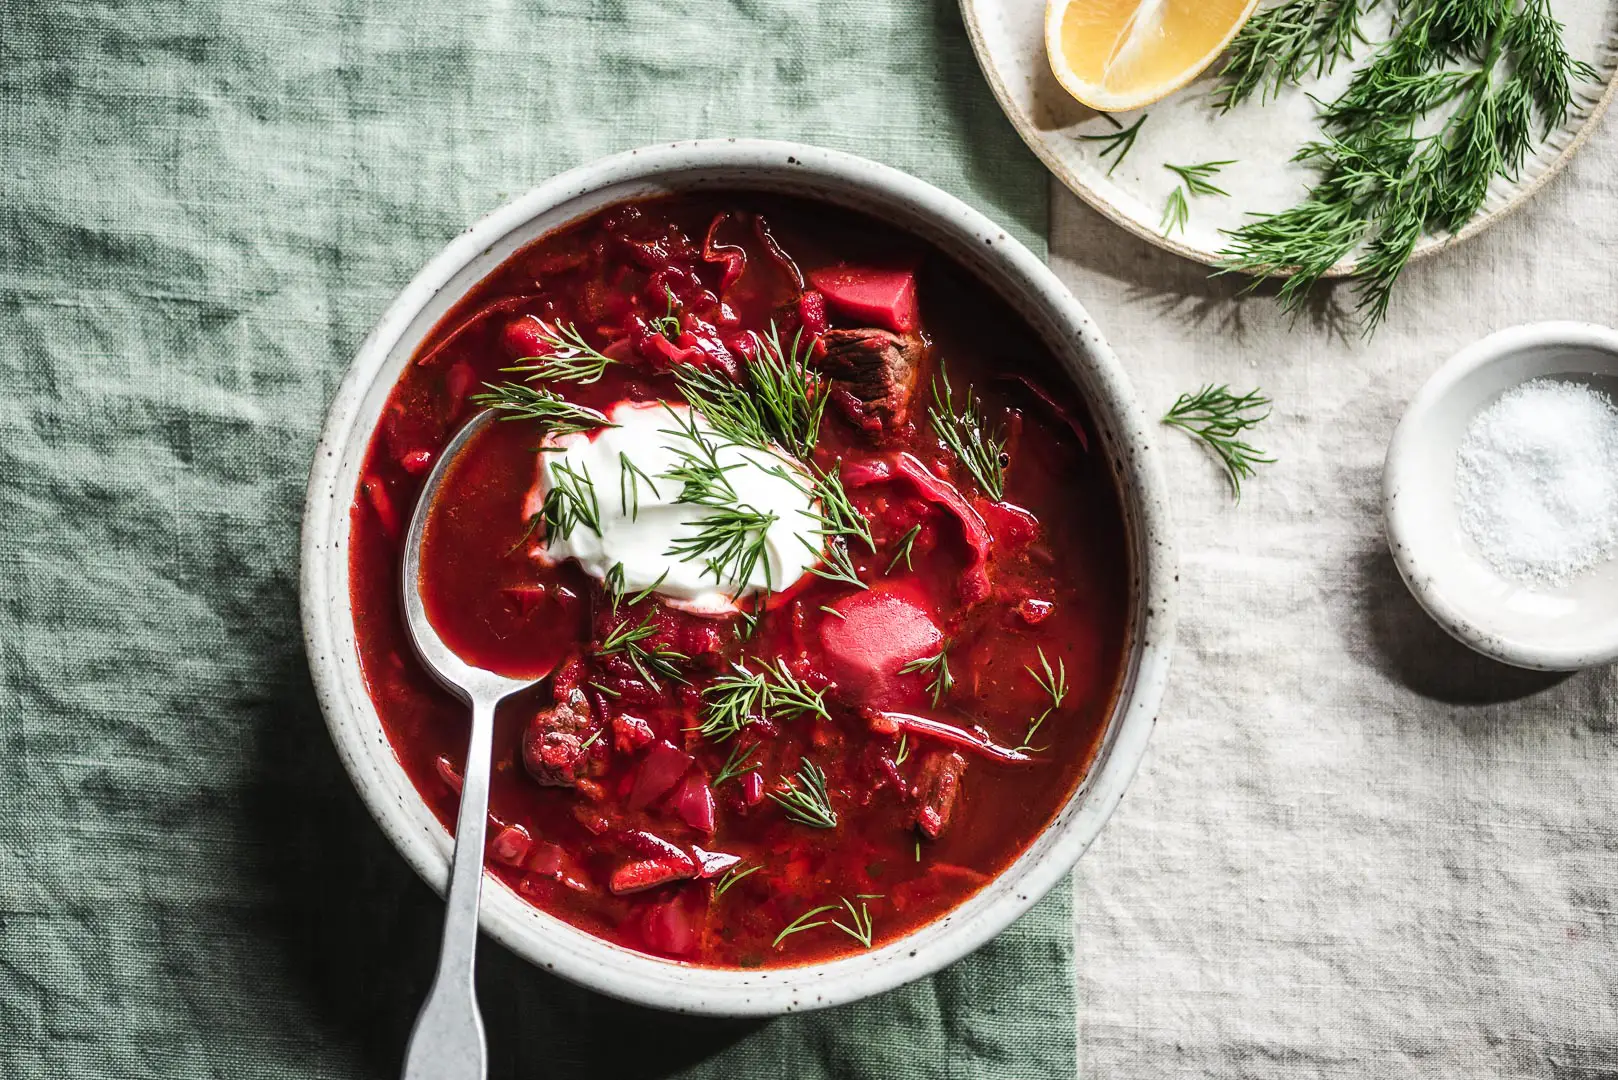 Hearty, rich, and perfectly balanced in flavor & texture: babushka Bronia's borscht is the ultimate comforting and nourishing soup